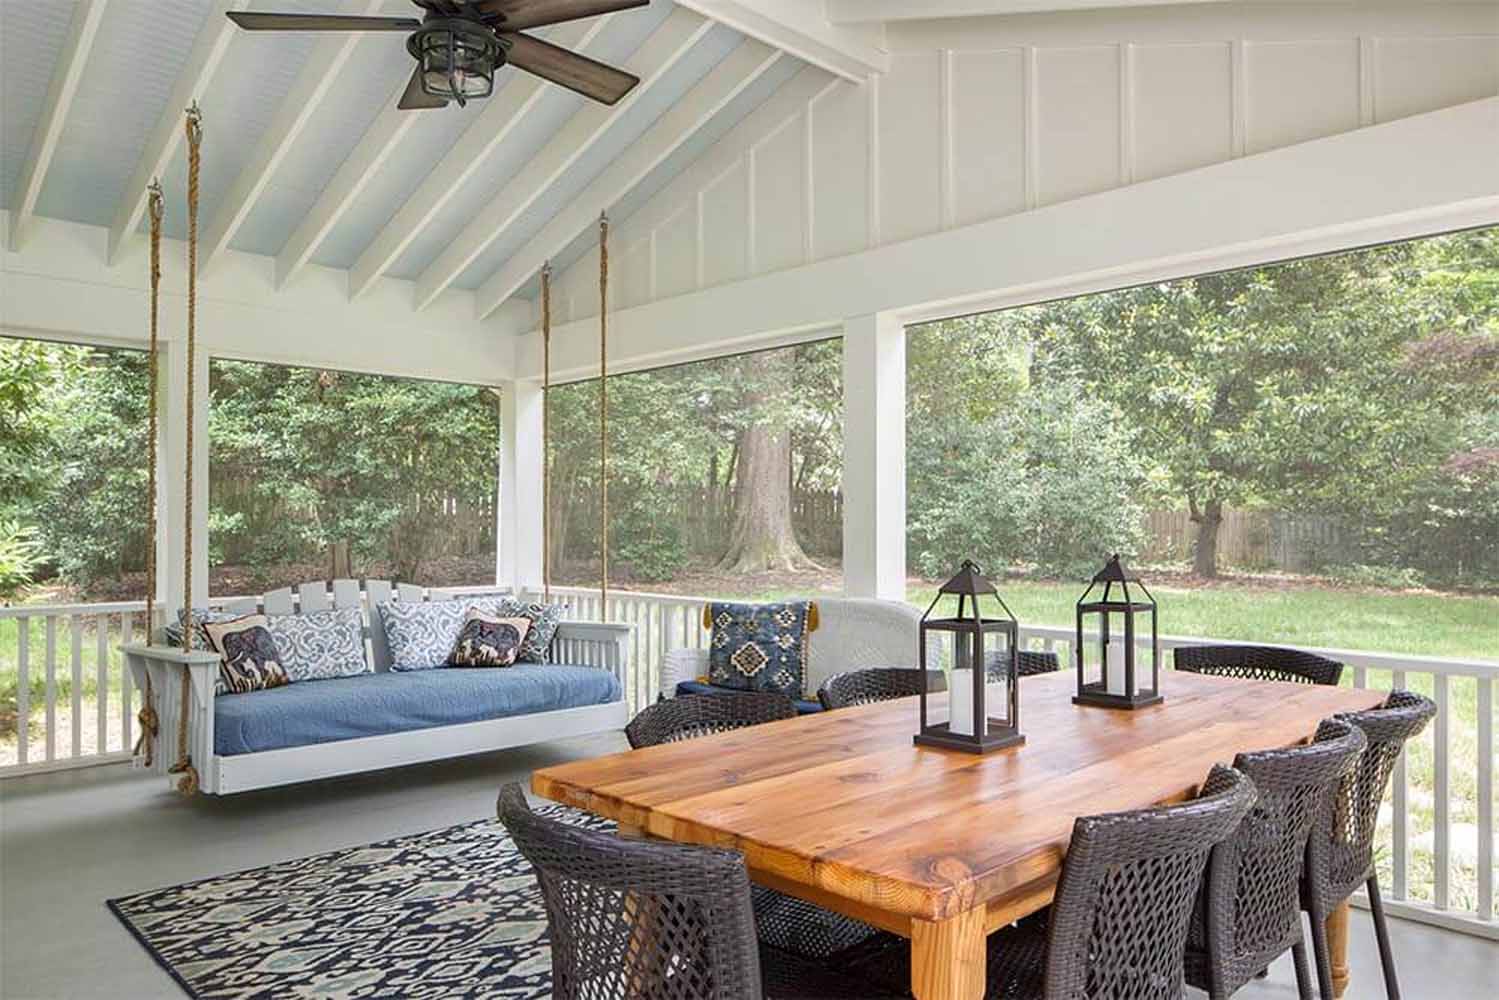 A BK Martin screened porch addition in the West End of Richmond, VA